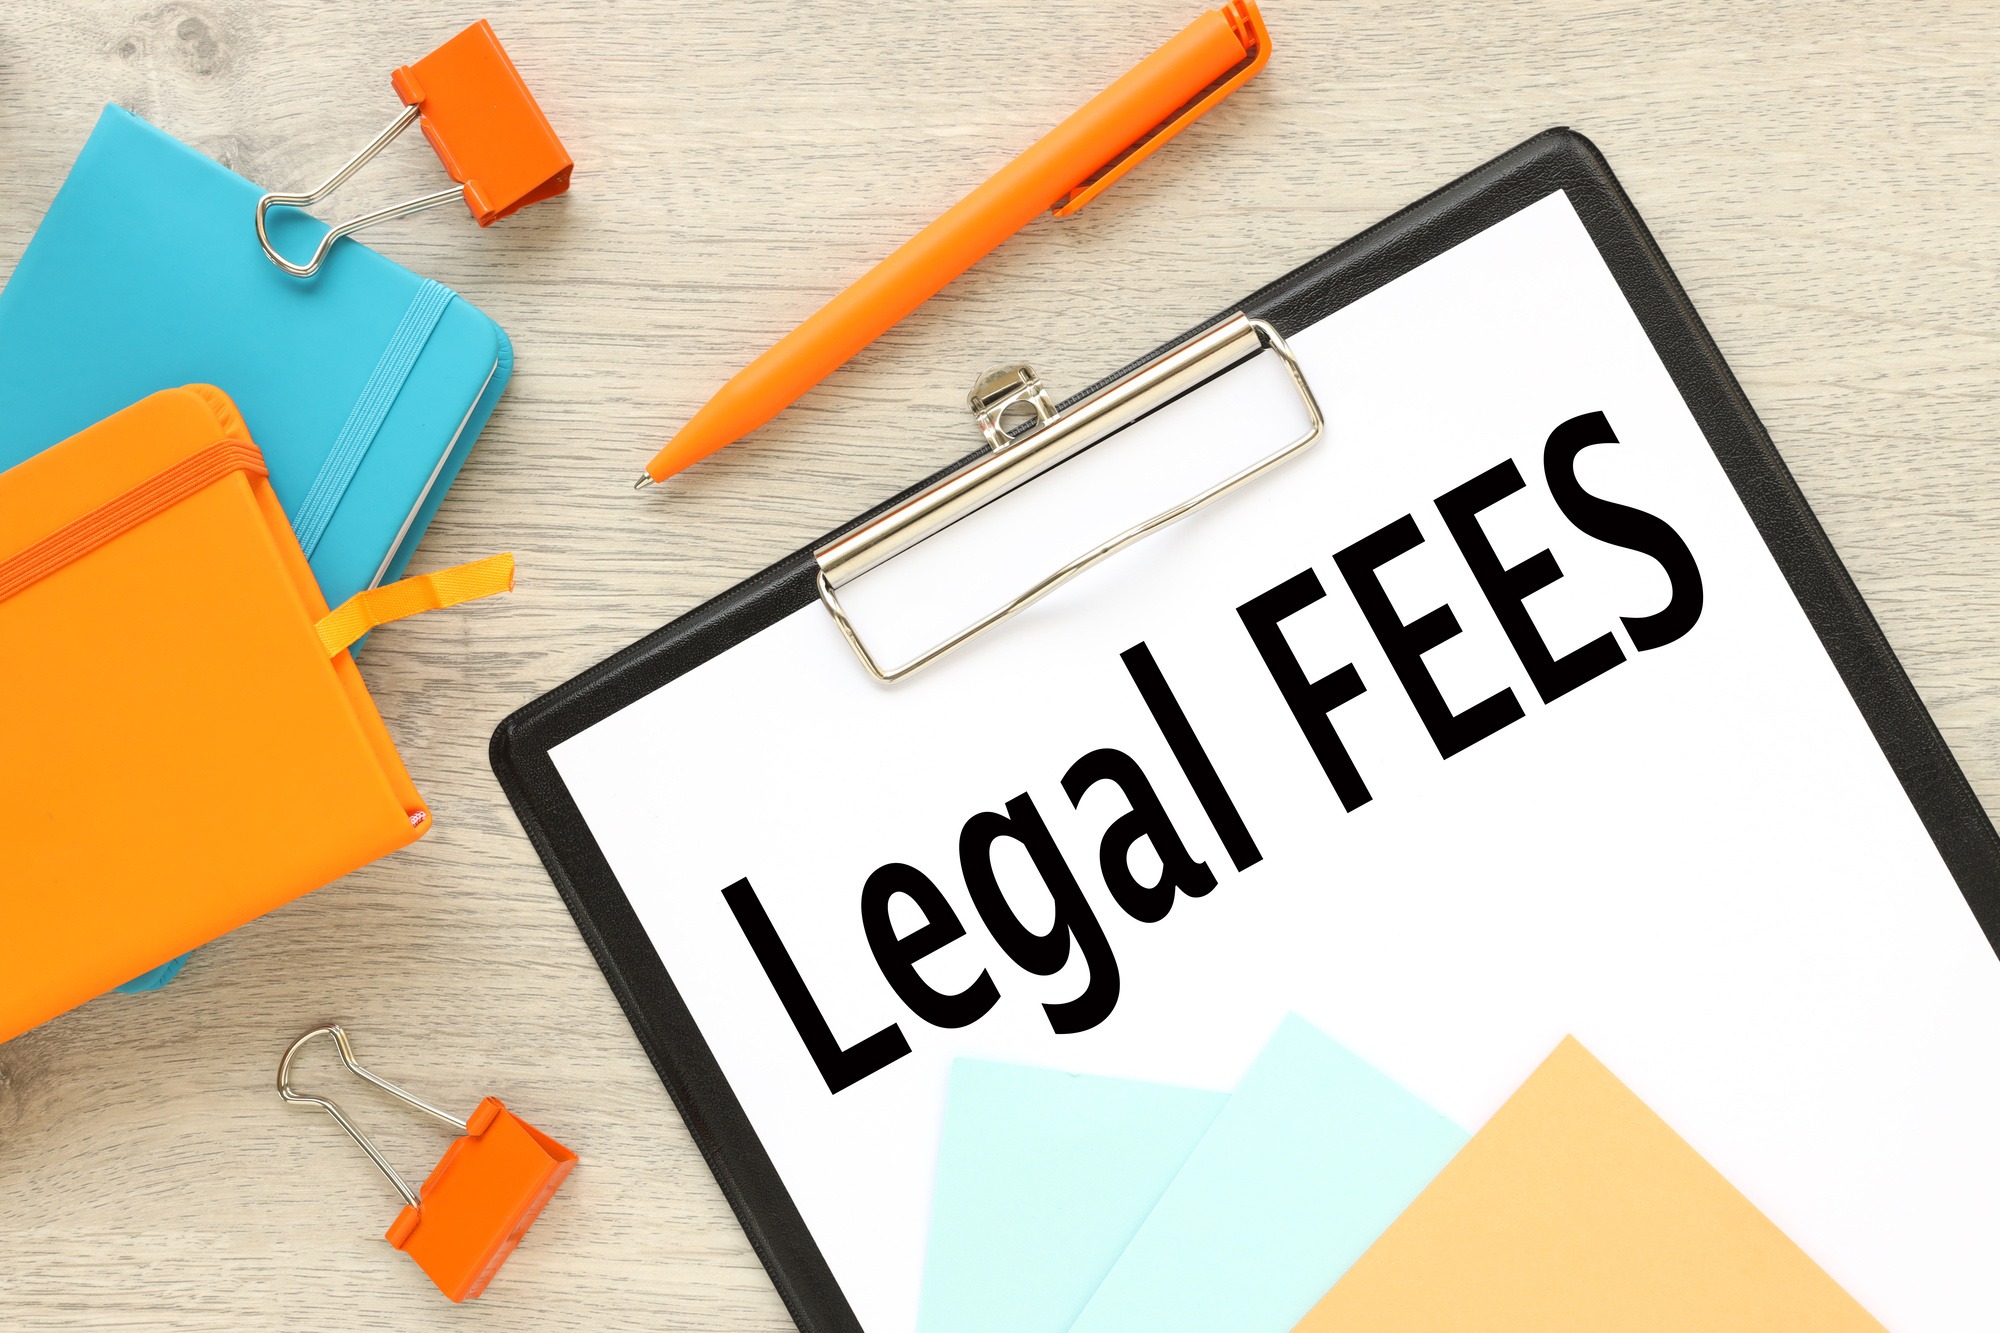 Legal Fees. Fixed price for a specific service. business and finance concept. Costs, fees, commissions, fines. Cost, fees and taxes.